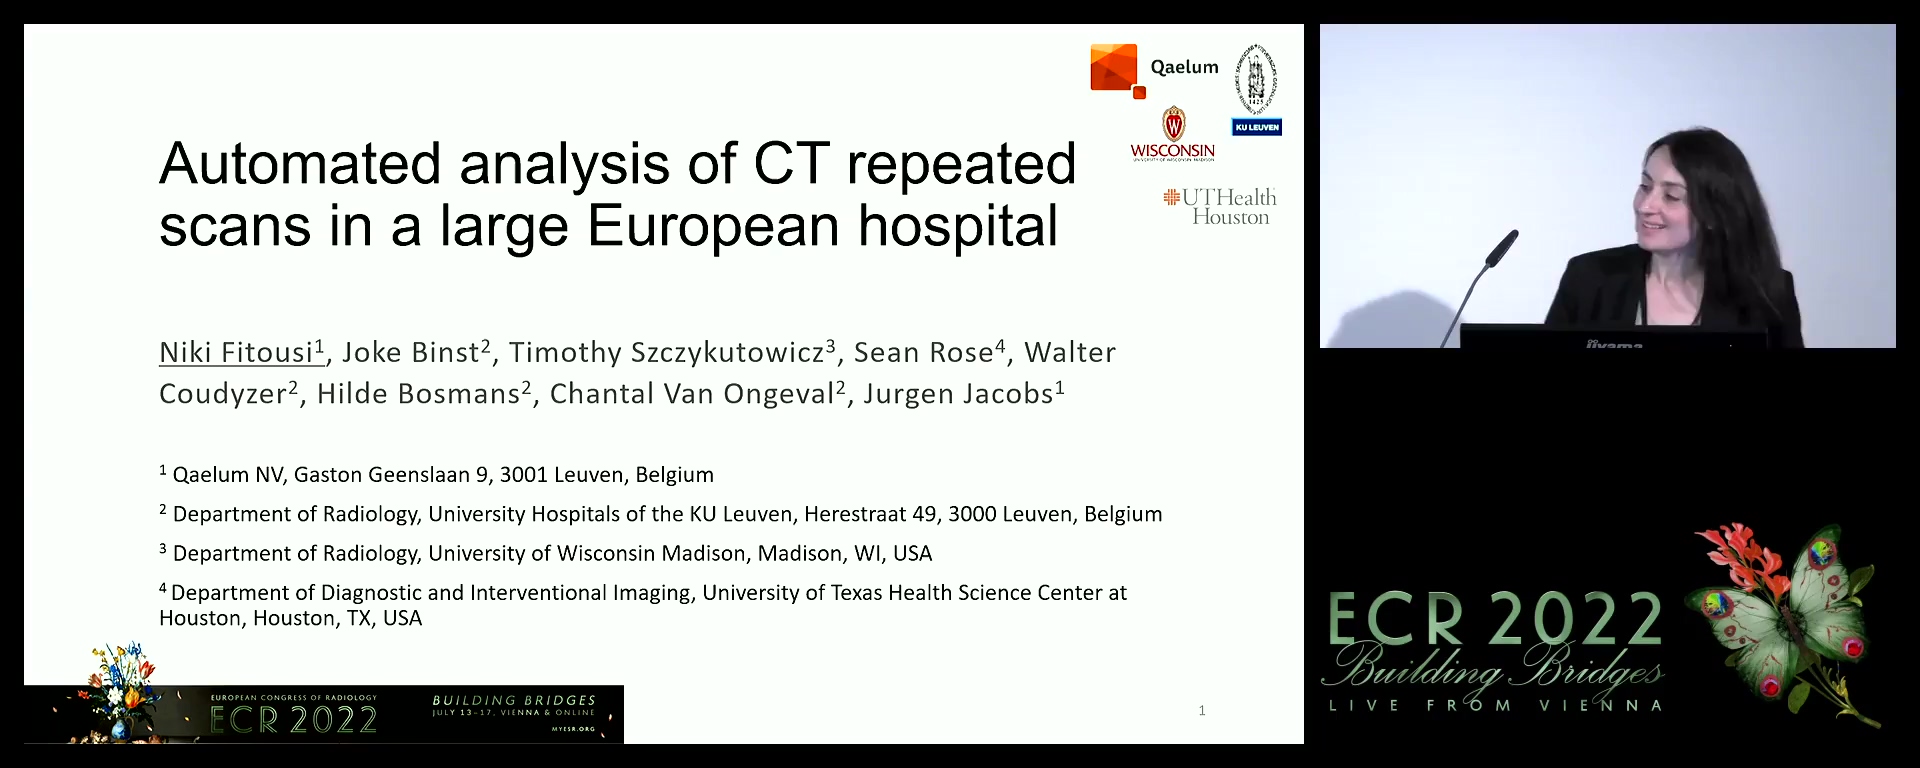 Automated analysis of CT repeated scans in a large European hospital